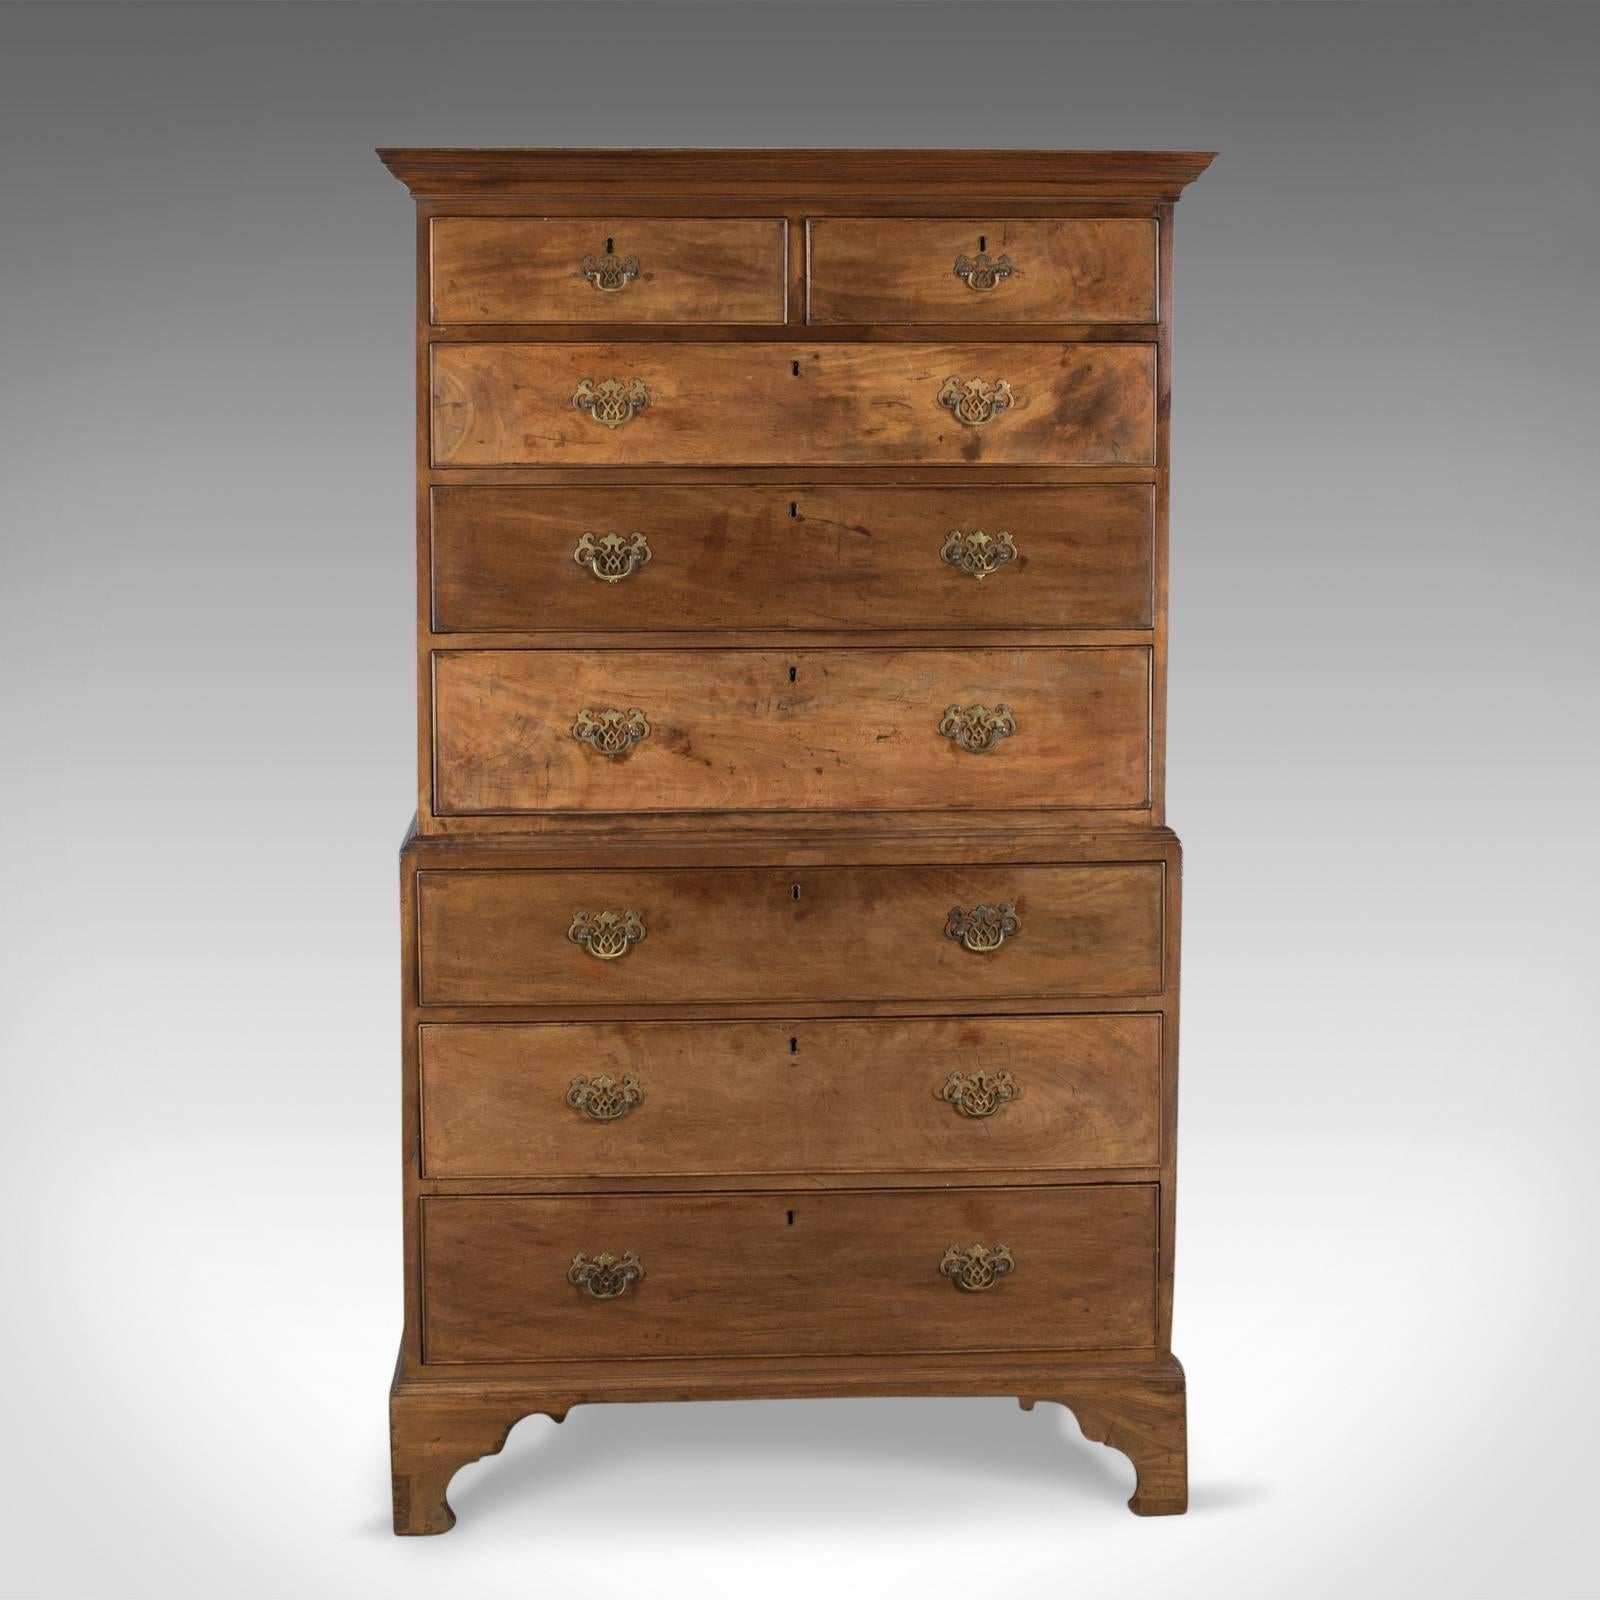 This is an antique chest on chest of drawers, an English, late Georgian tall boy in mahogany and dating to circa 1780.

Appealing, natural tonal qualities to the quality mahogany
Grain interest throughout with a lustrous, wax polished